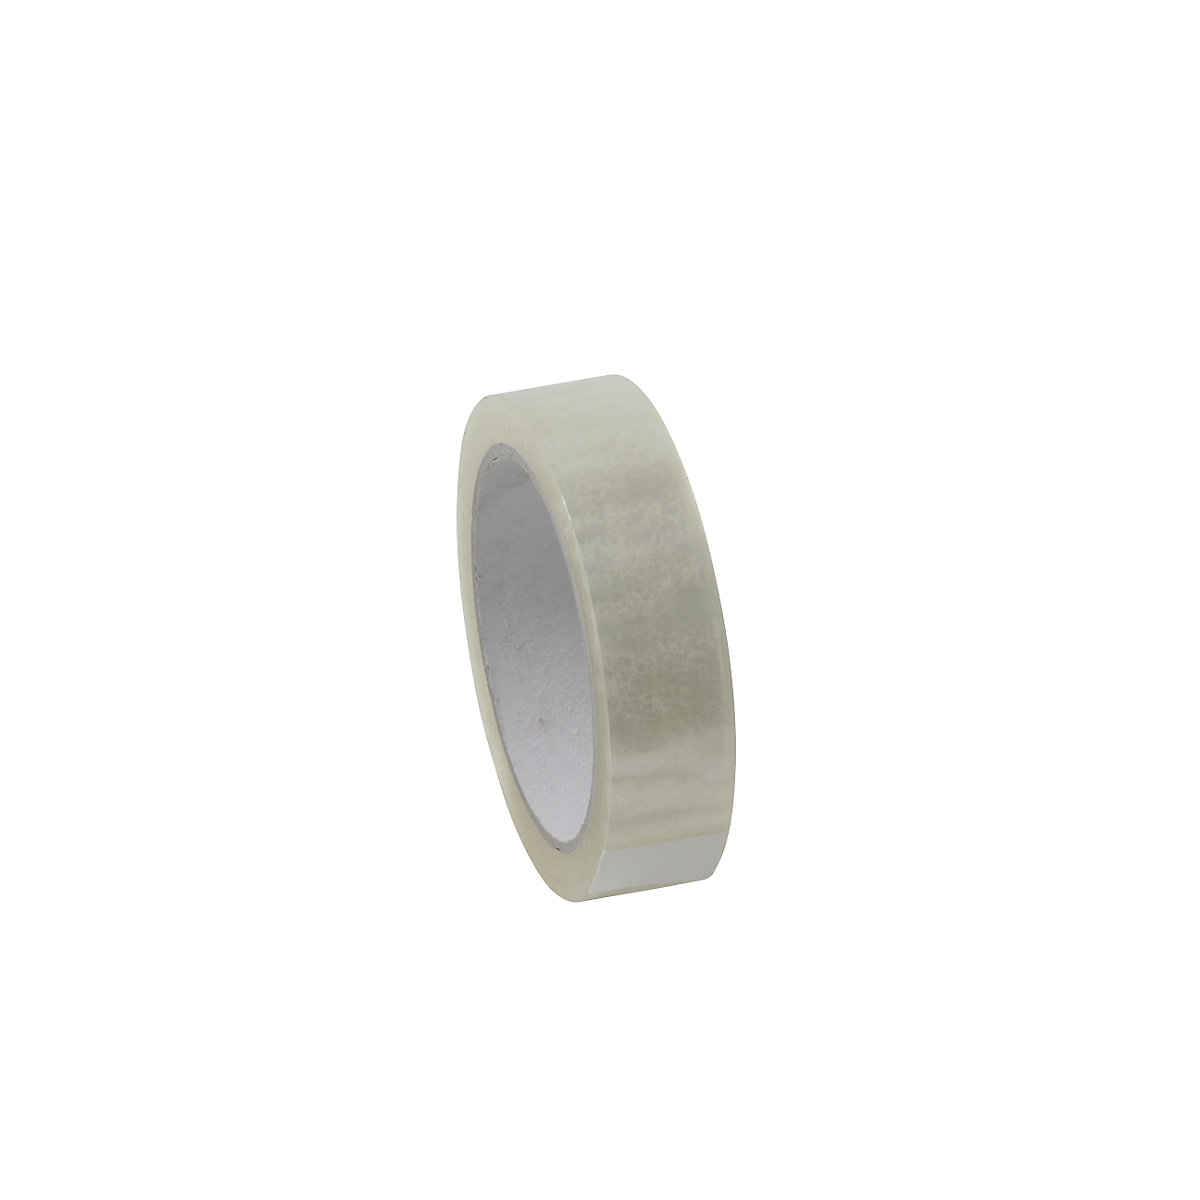 PP packing tape, quiet model, pack of 72 rolls, transparent, tape width 25 mm-2